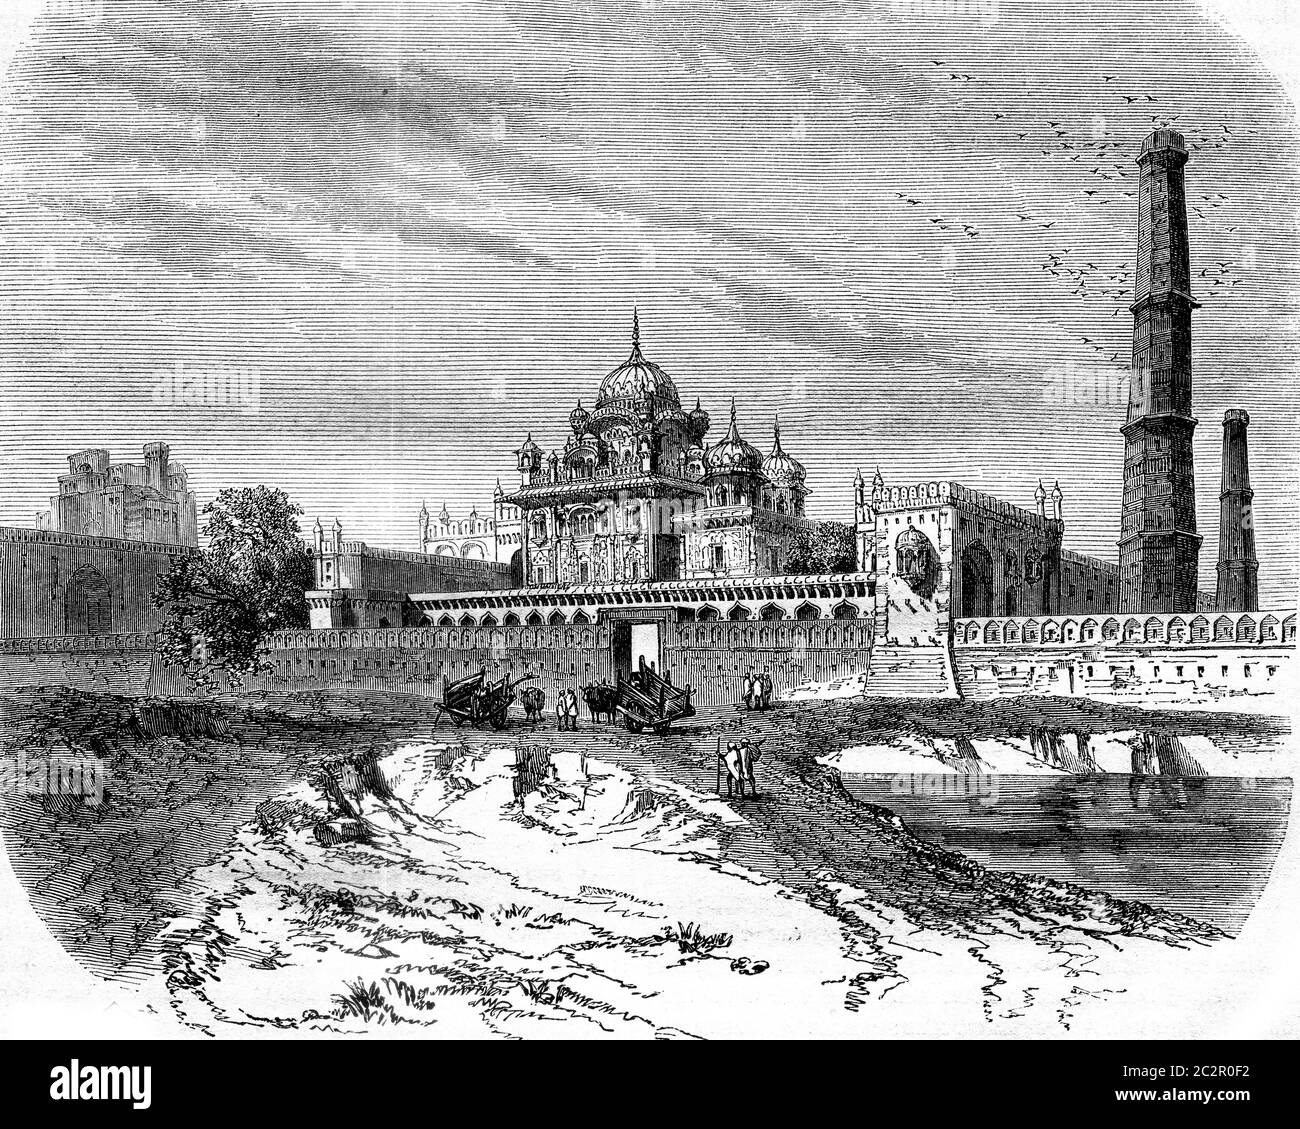 The Tomb of Ranjit Singh, in Lahore, vintage engraved illustration. Magasin Pittoresque 1858. Stock Photo